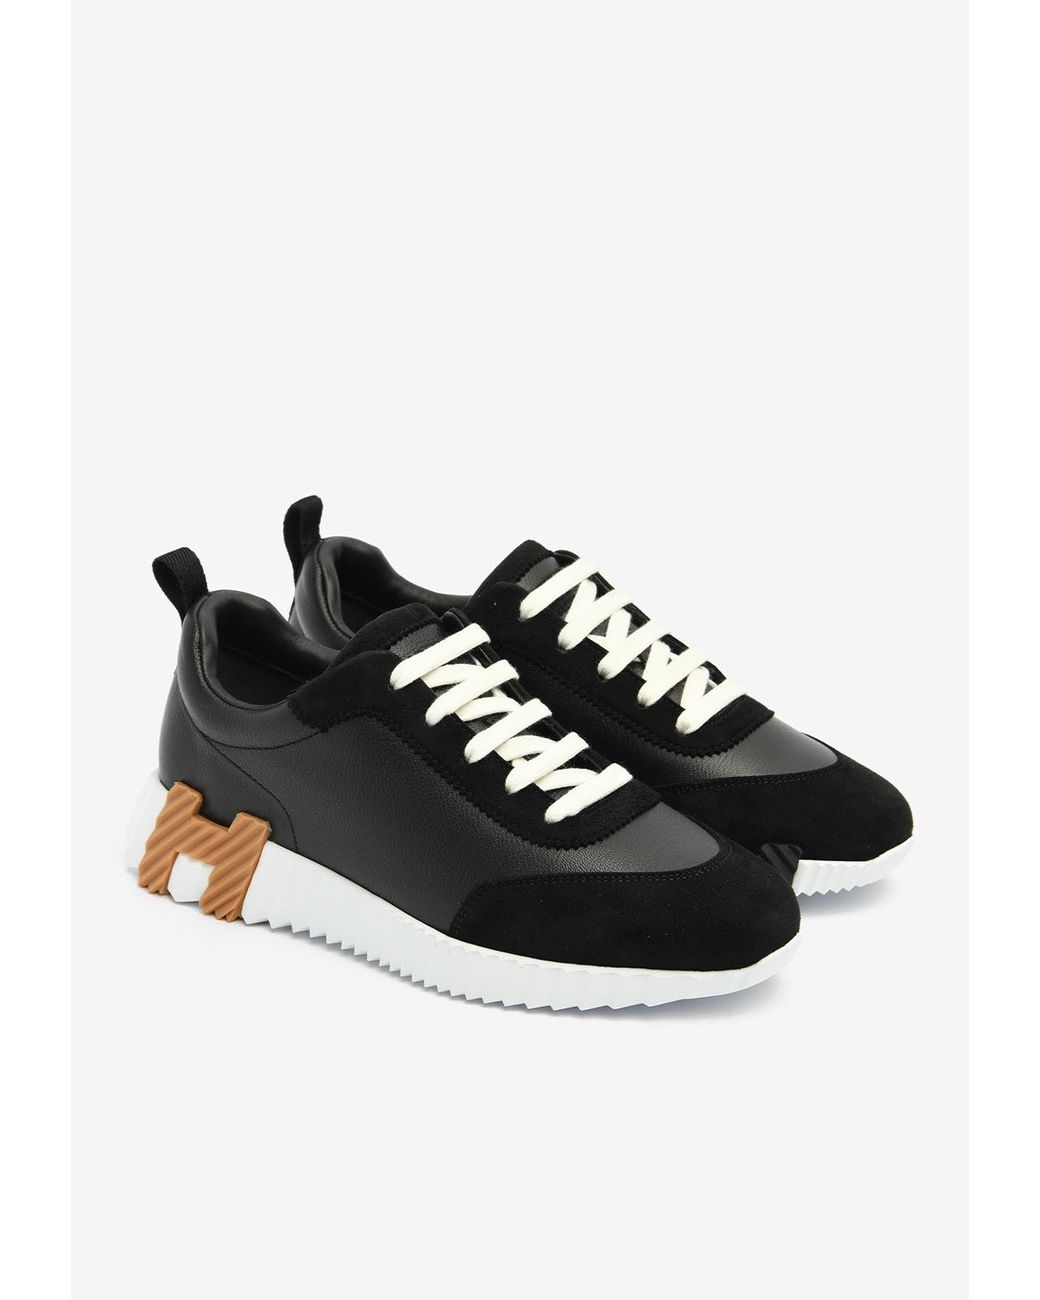 Hermès Bouncing Sneakers In Suede And Nappa Leather in Black | Lyst